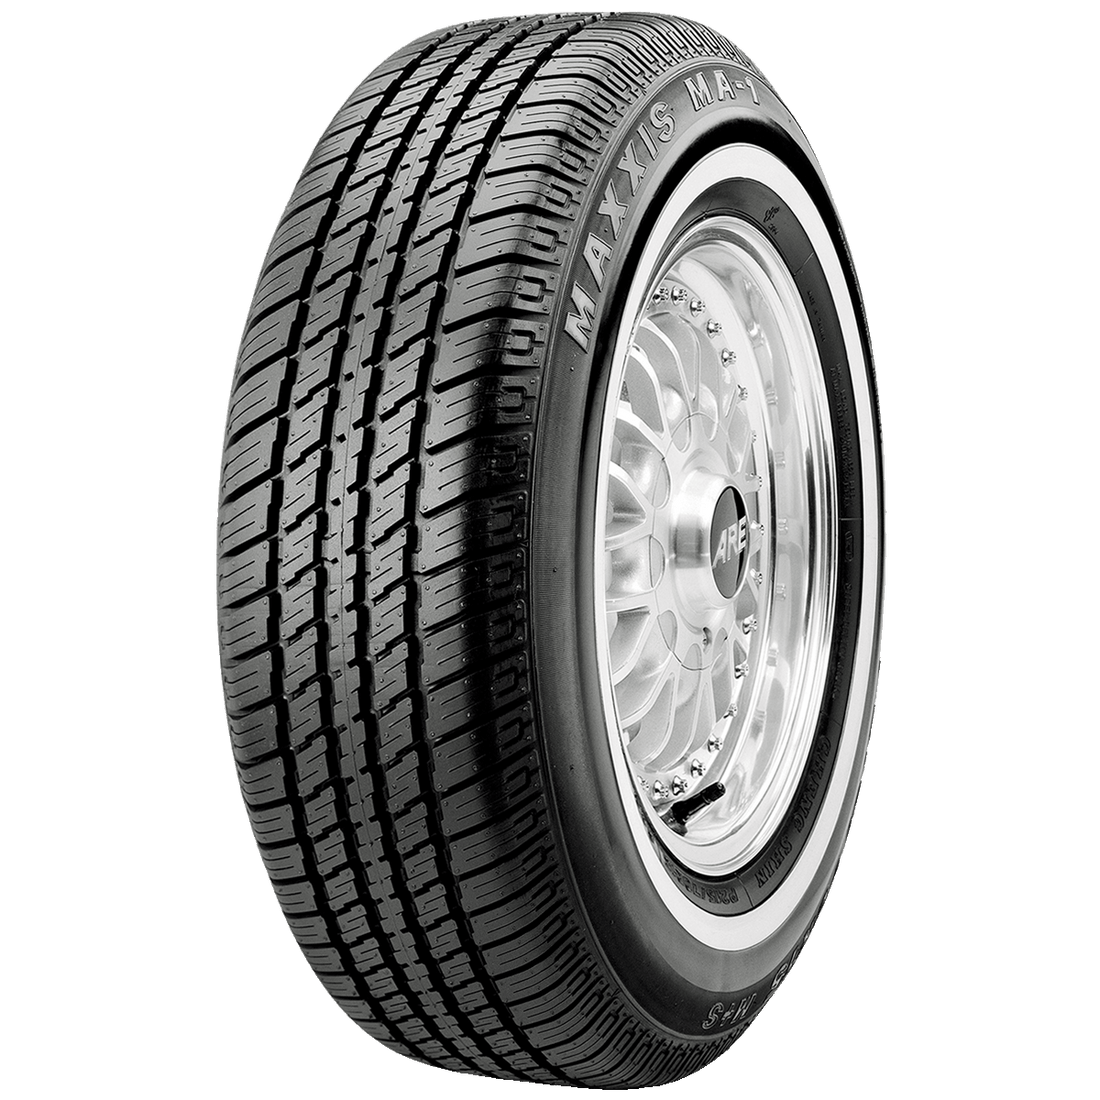 MA-1 – Maxxis - | Tires Shop Tires USA